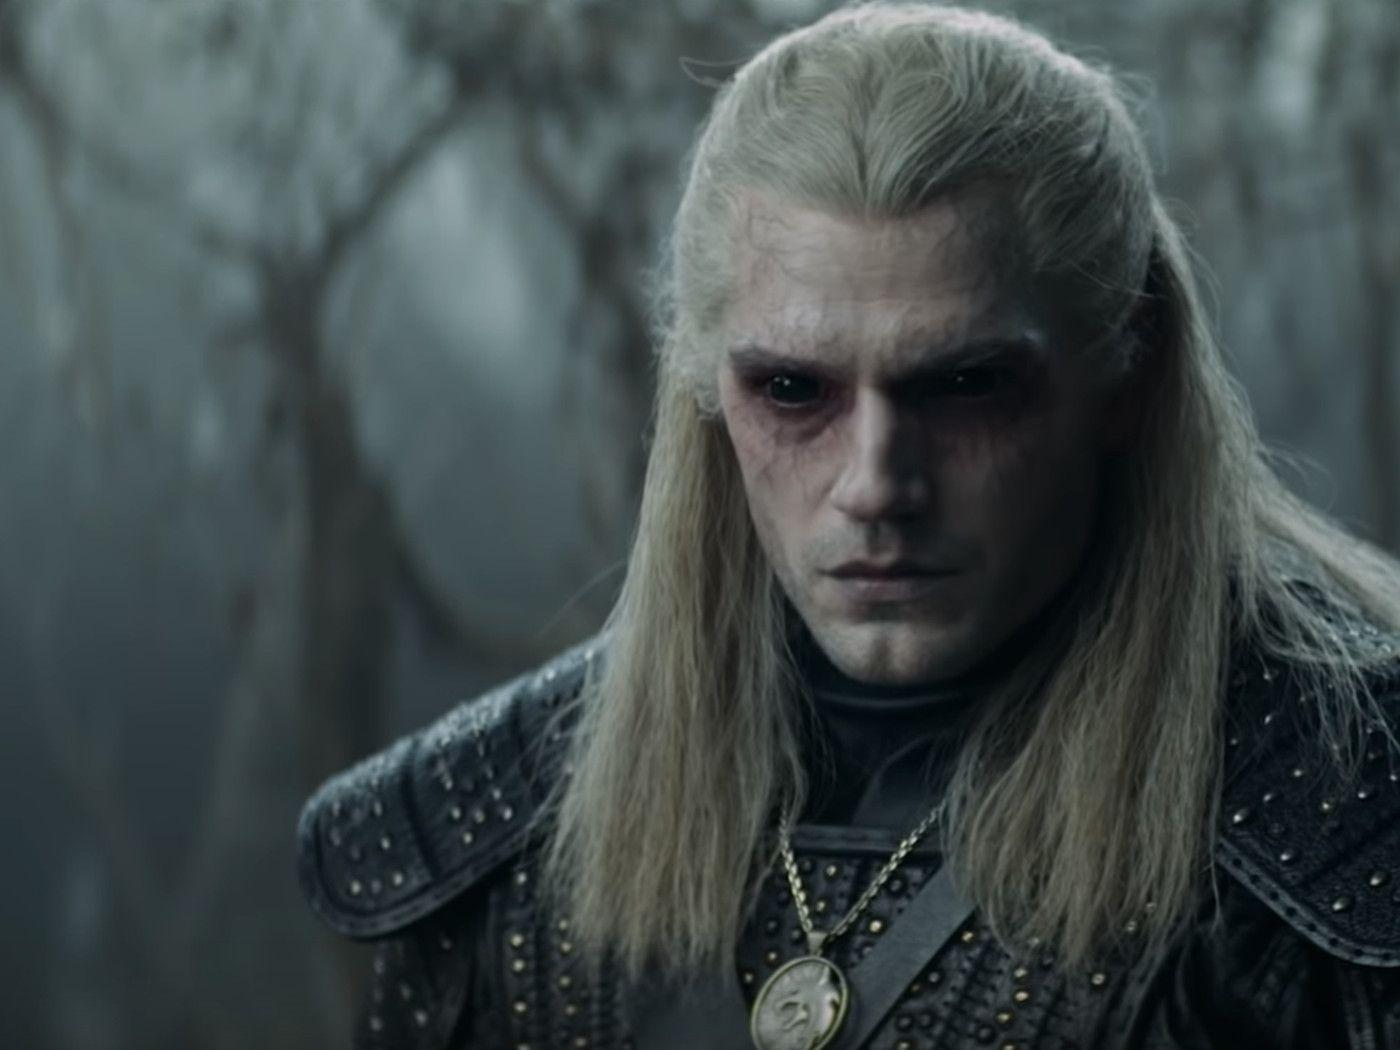 The Witcher's first trailer brings Henry Cavill's Geralt to life